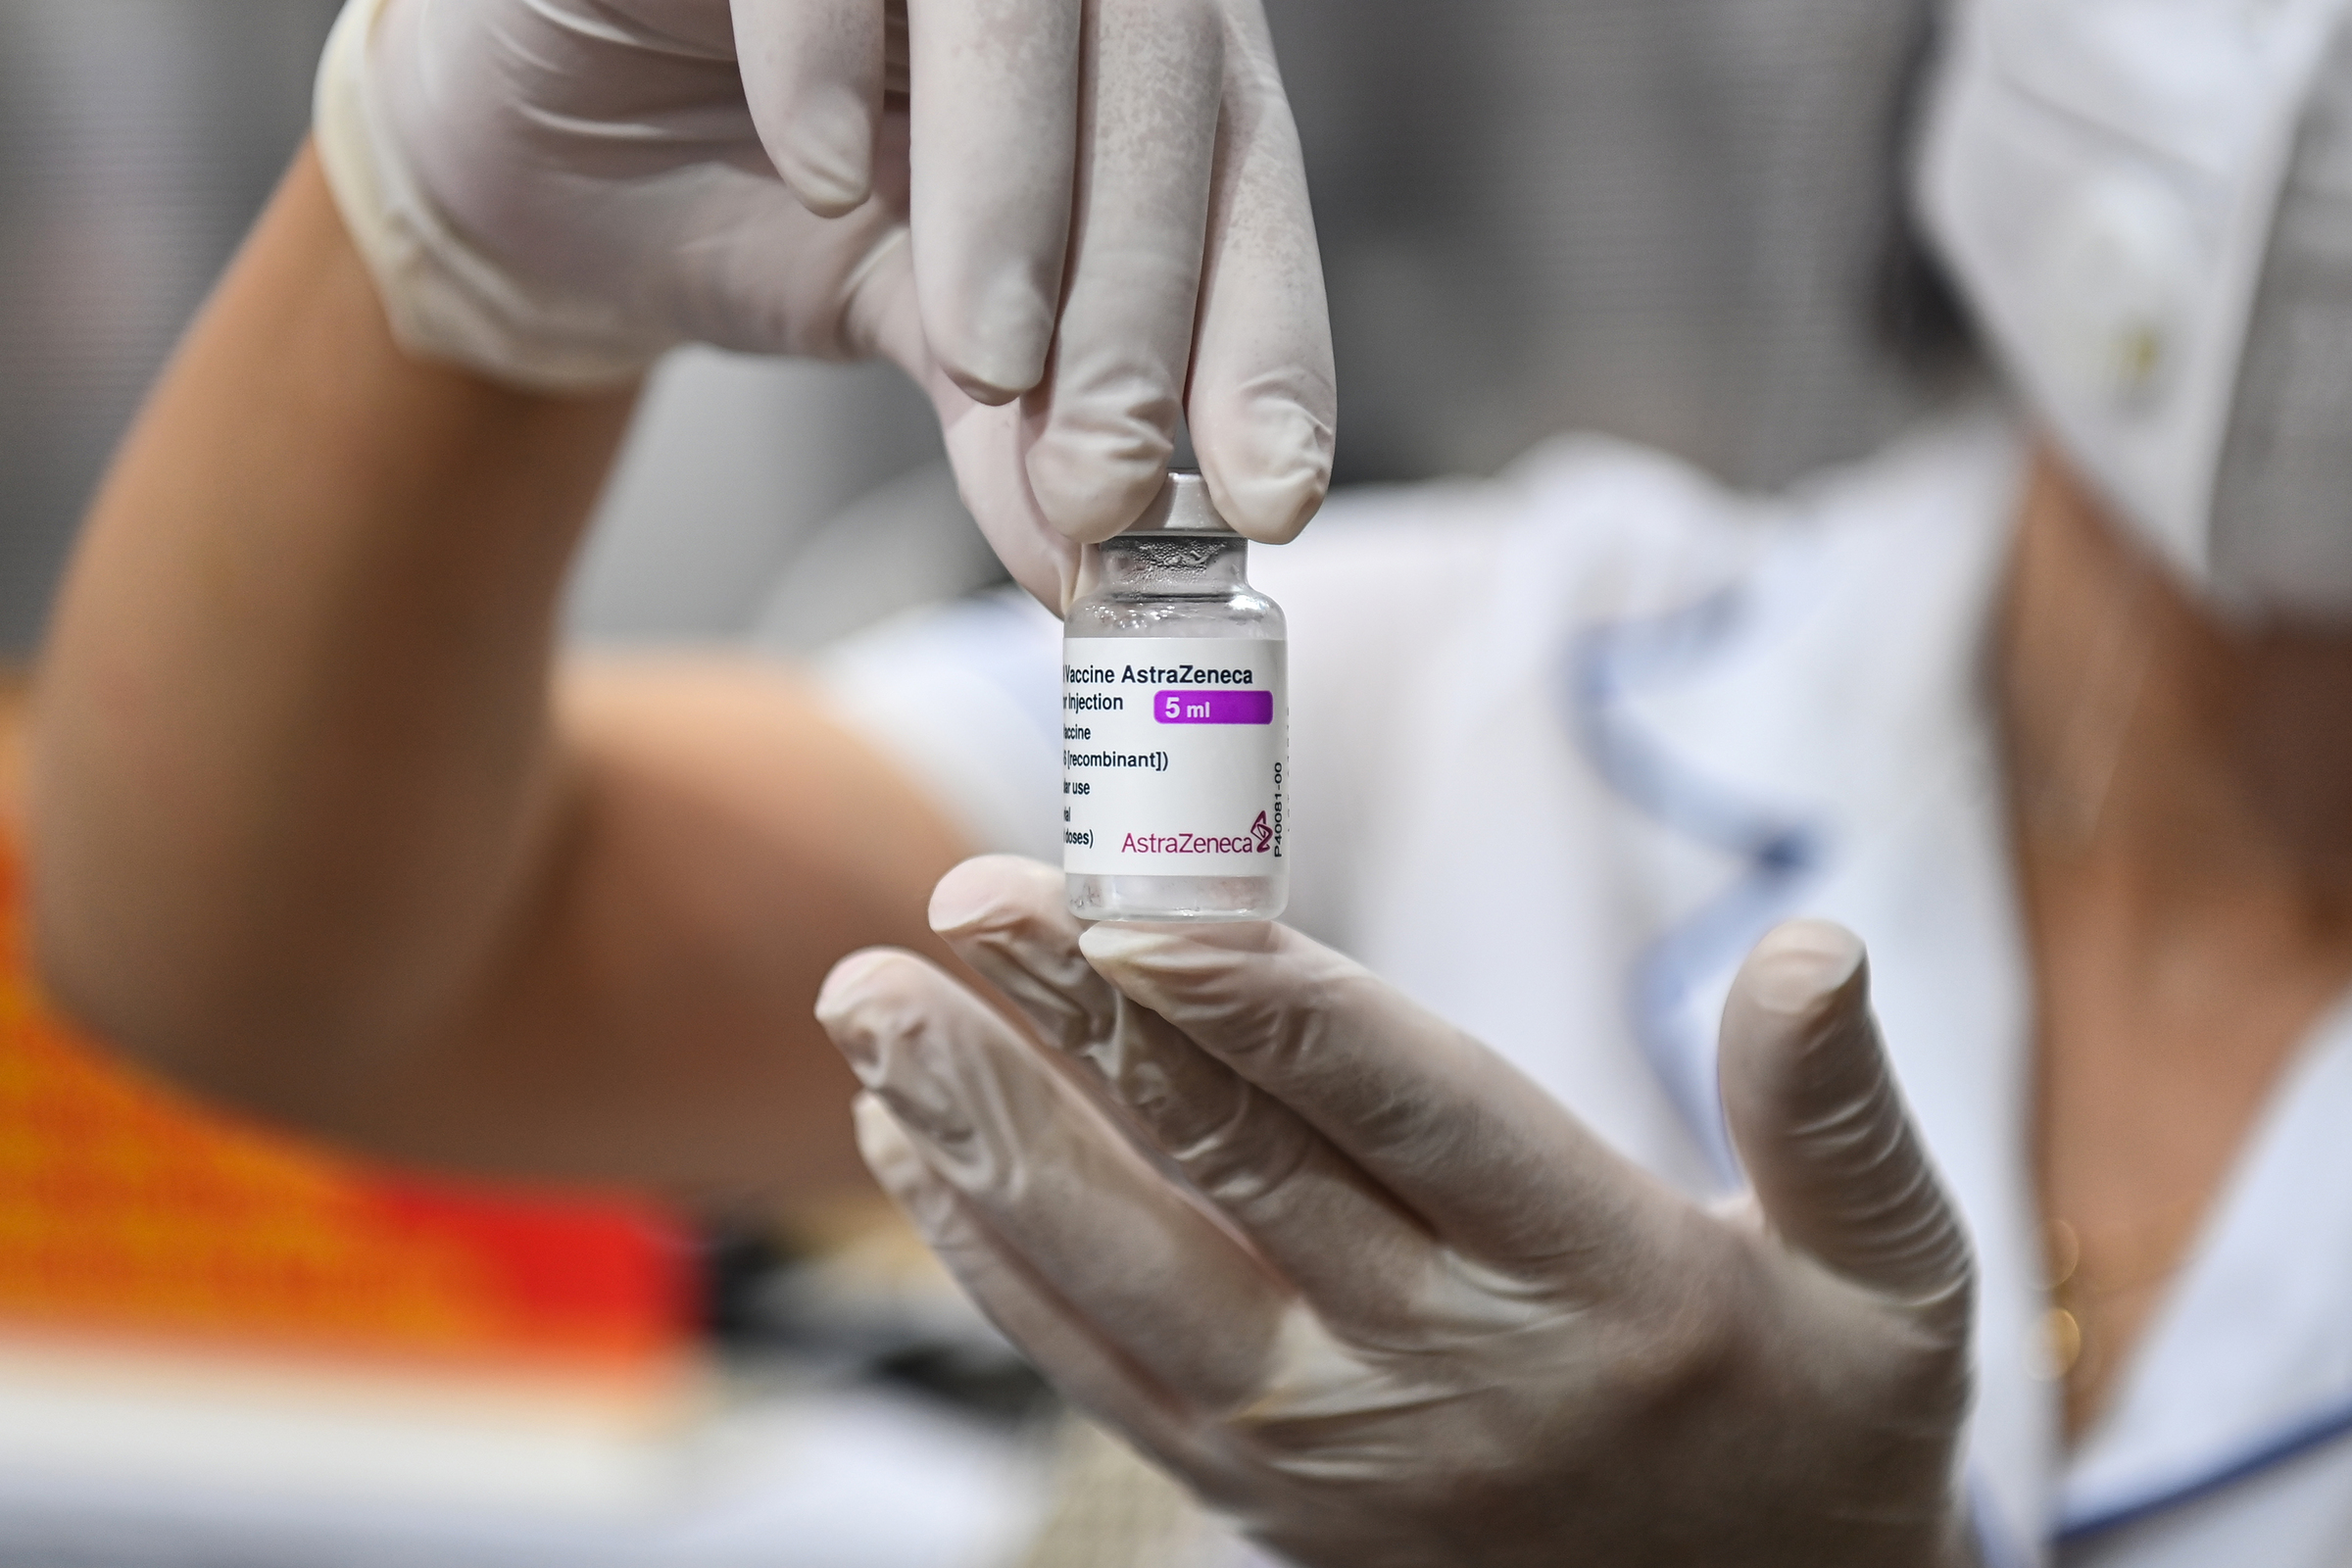 A medic holds a vial of the AstraZeneca Covid-19 vaccine in Hanoi. Photo by VnExpress/Giang Huy